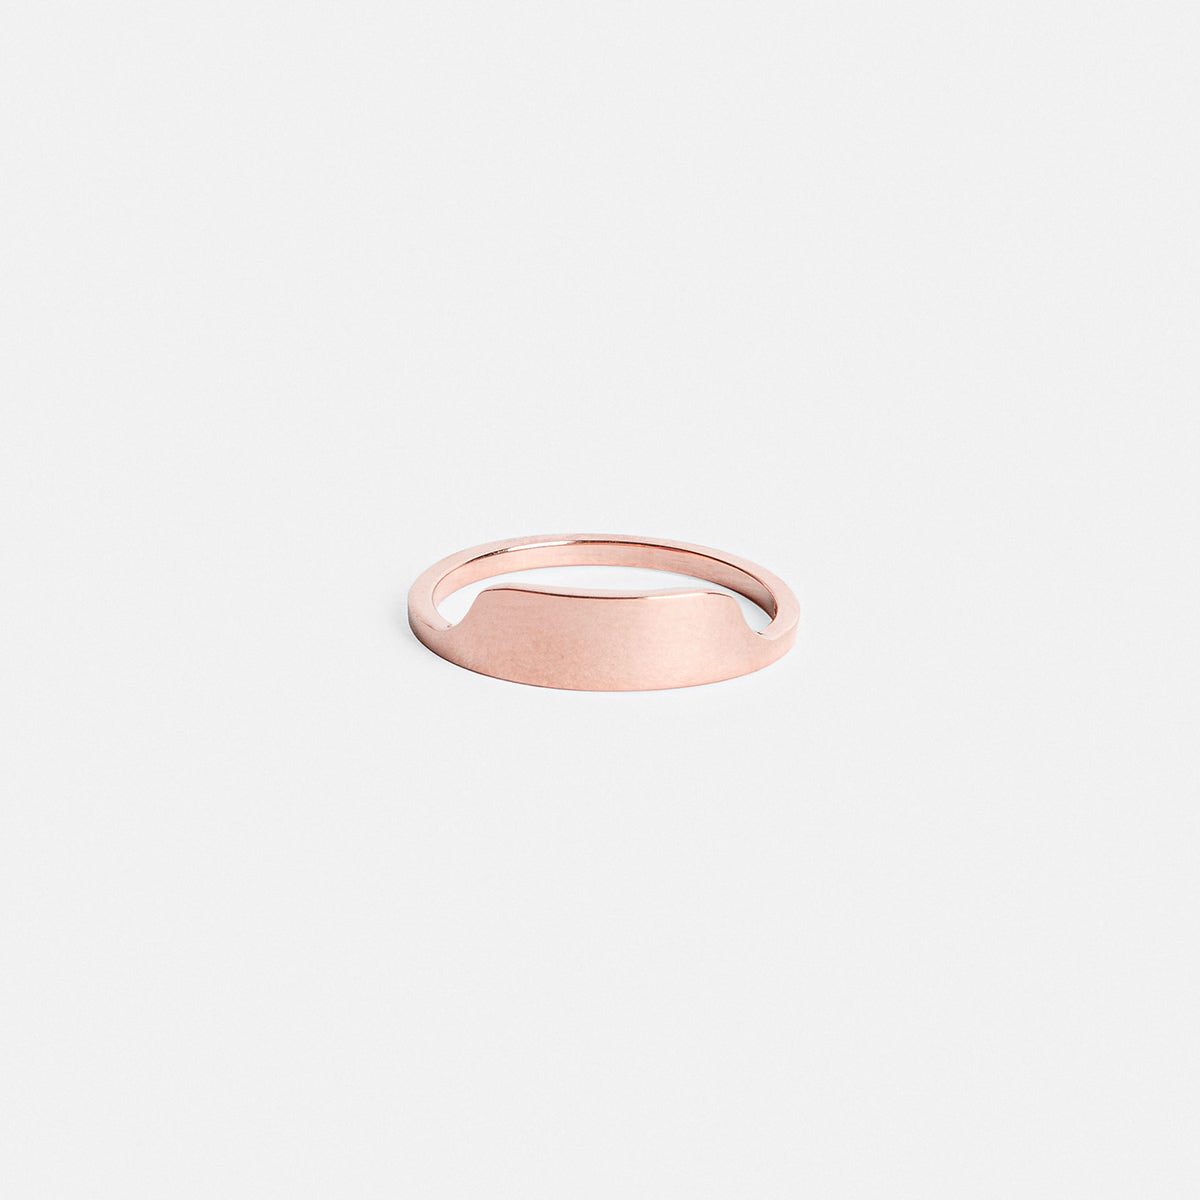 Tylo Unusual Ring in 14k Rose Gold By SHW Fine Jewelry NYC